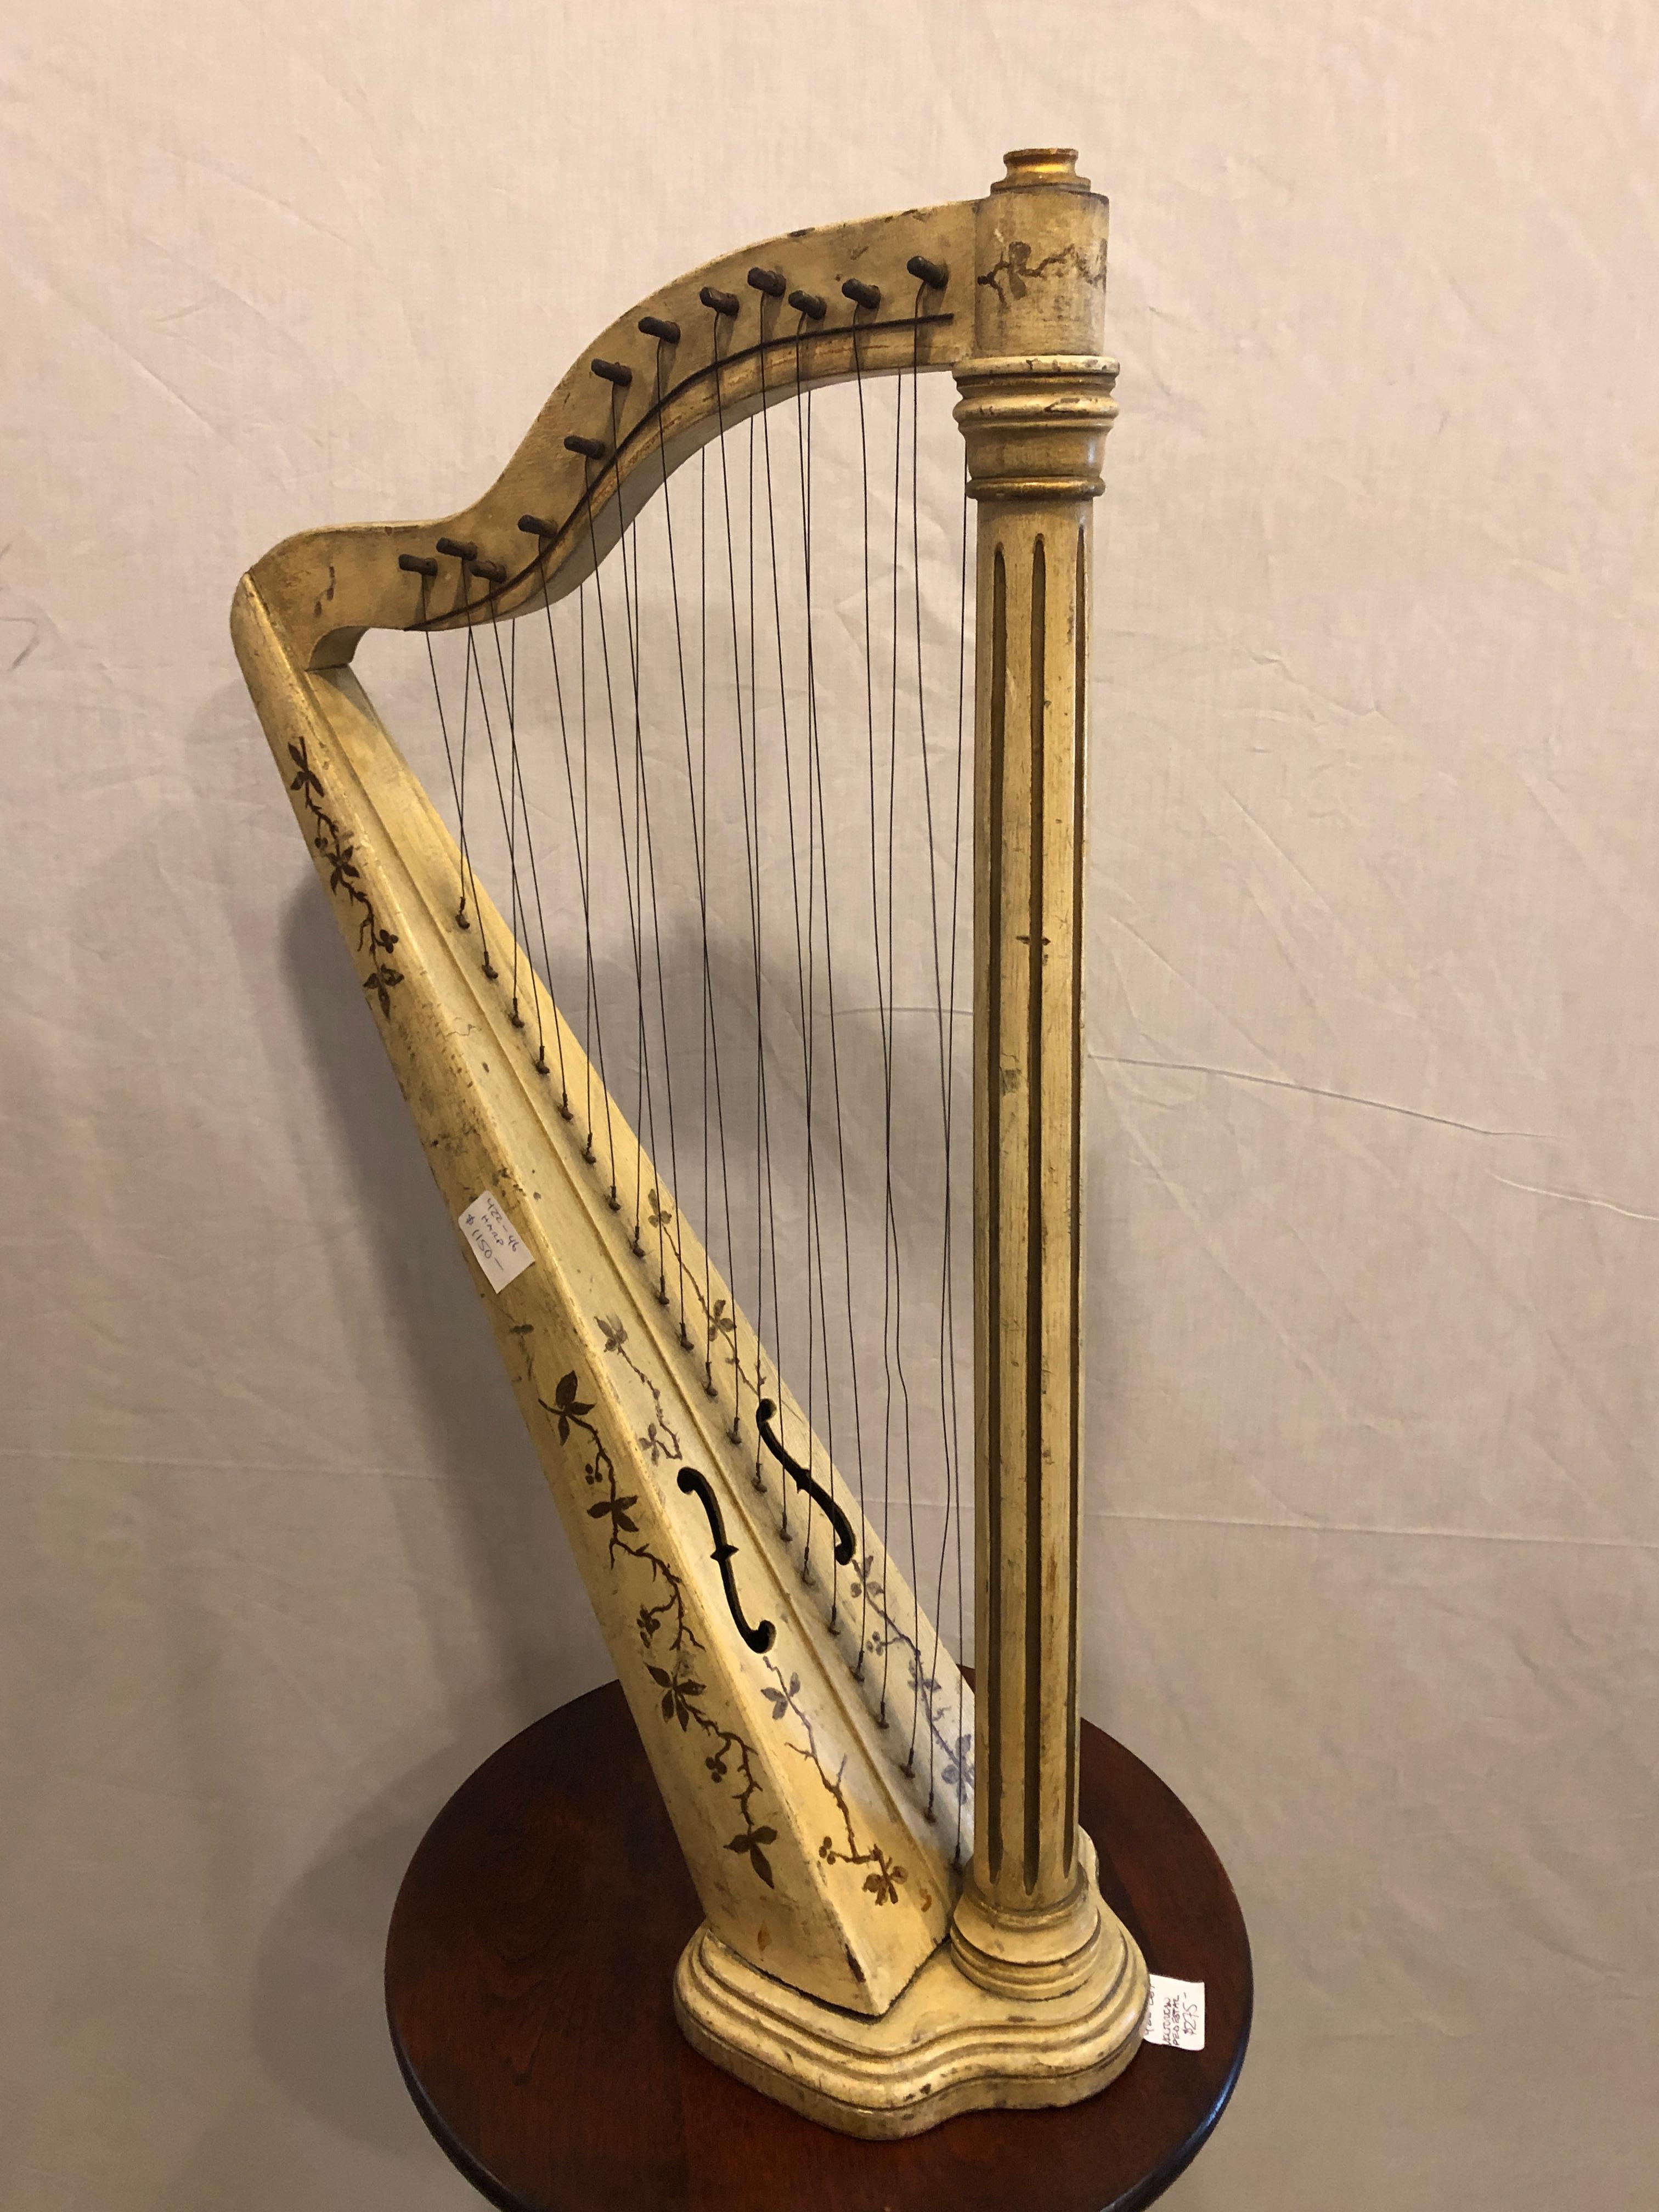 An Italian antique double string paint decorated table harp. This shining example of musicality is certain to draw attention and spark a conversation. Gilt gold decorated over a worn aged painted finish. Would need to be restrung to be played.